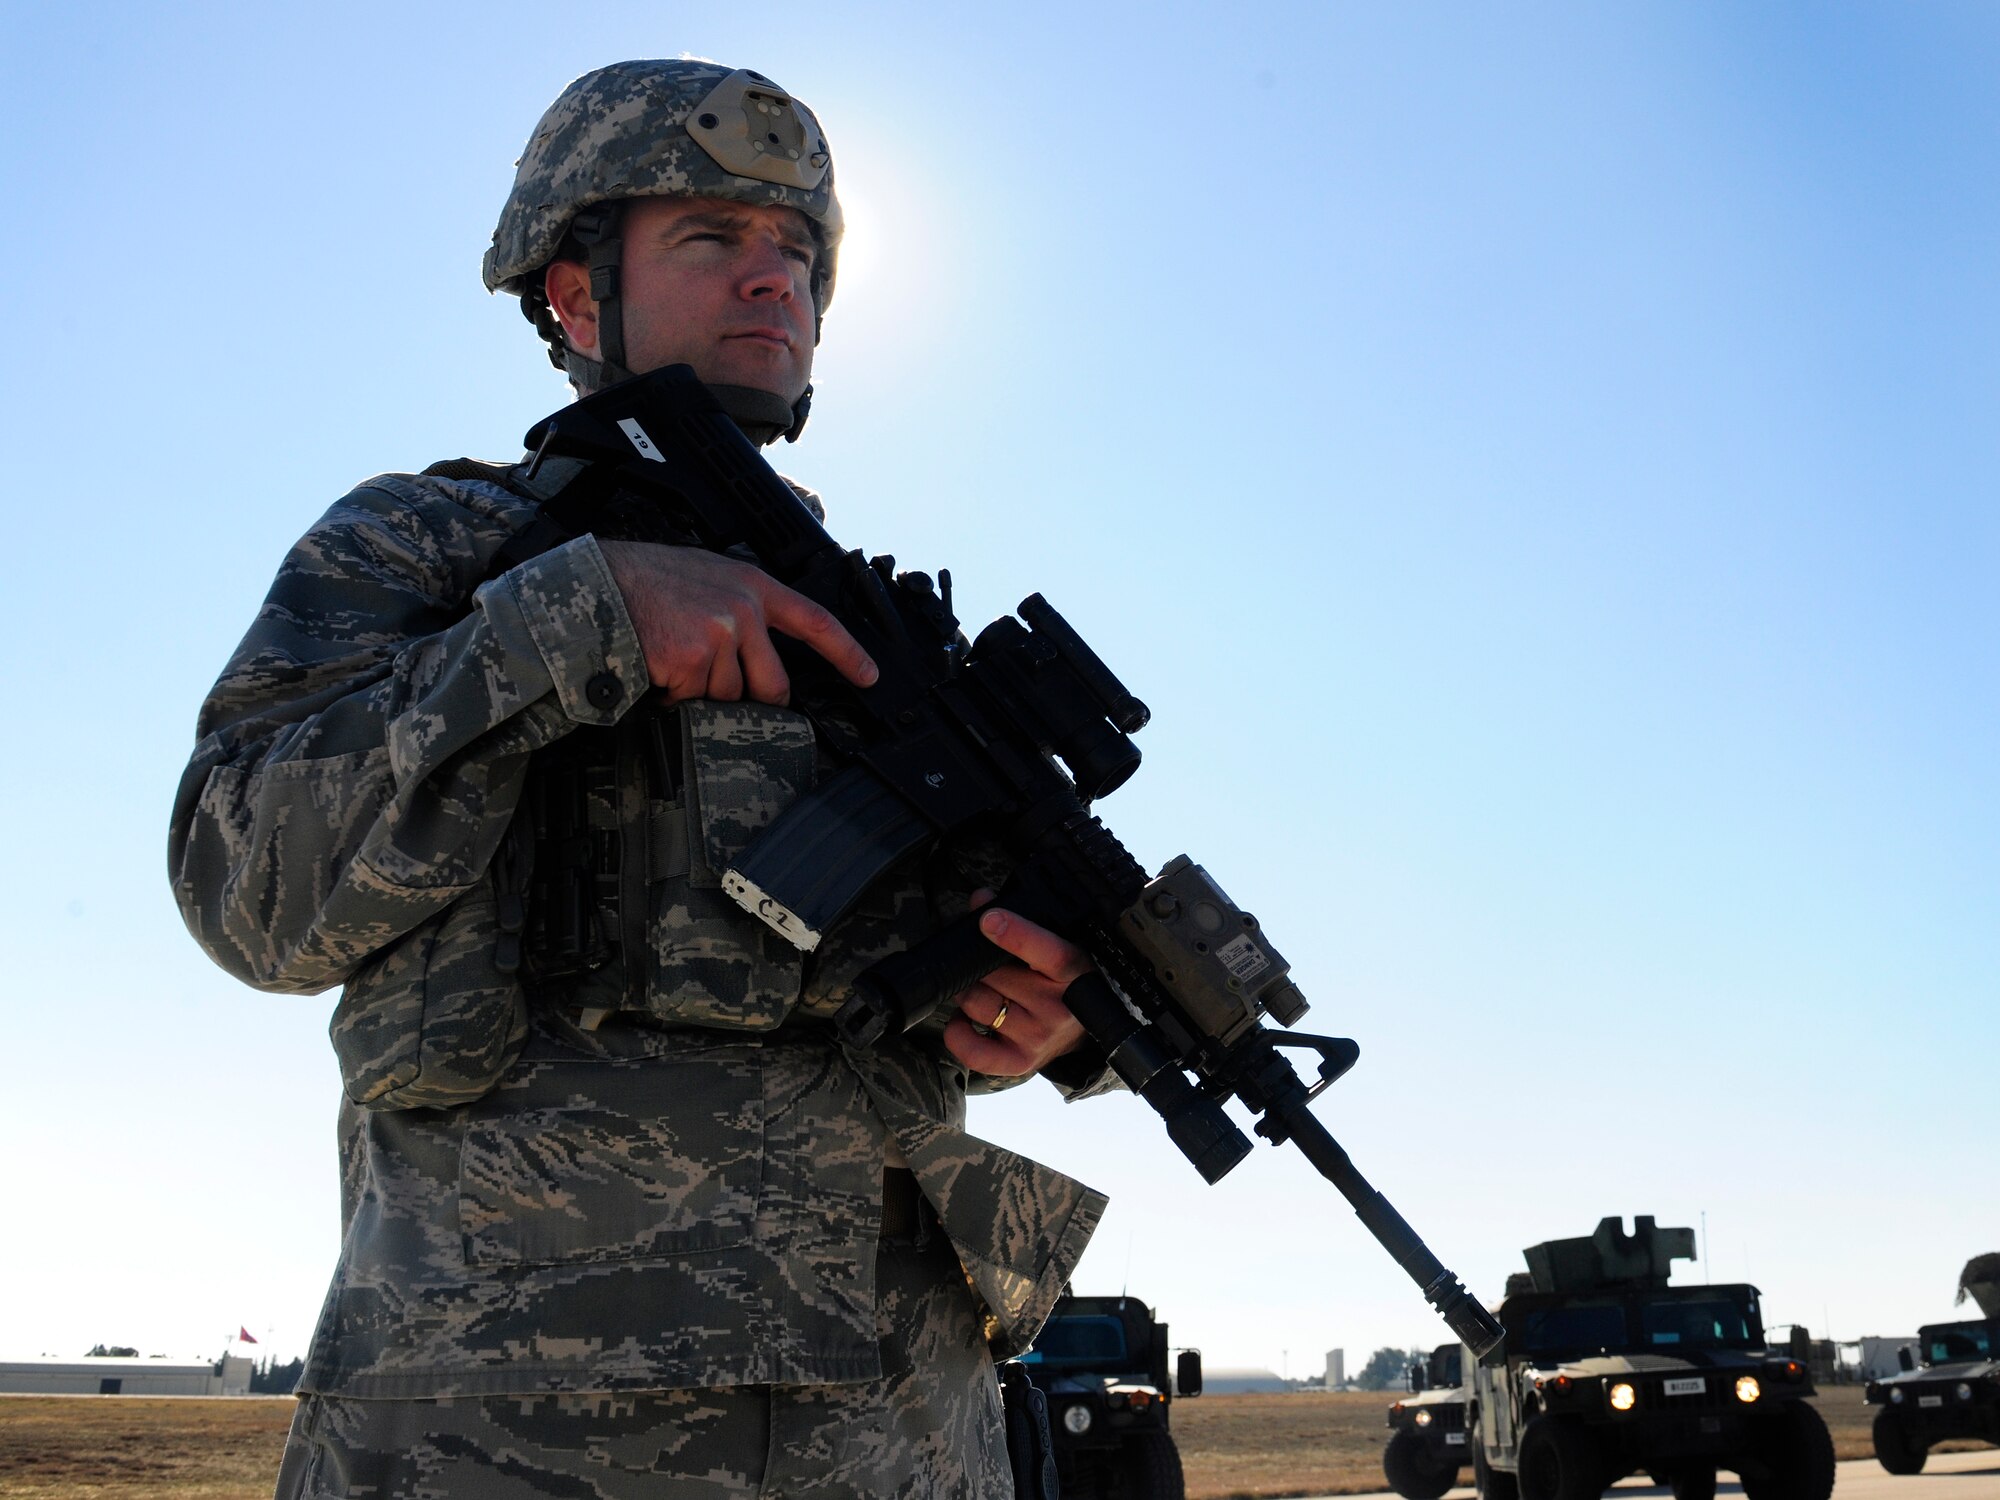 Master Sgt. Sam Peters, 39th Security Forces Squadron NCO in-charge of installation security, acts as an entry controller during a wing exercise Jan. 15, 2016, at Incirlik Air Base, Turkey. The exercise tested security forces ability to respond to insider threats and to practice convoy operations. (U.S. Air Force photo by Senior Airman Krystal Ardrey/Released)